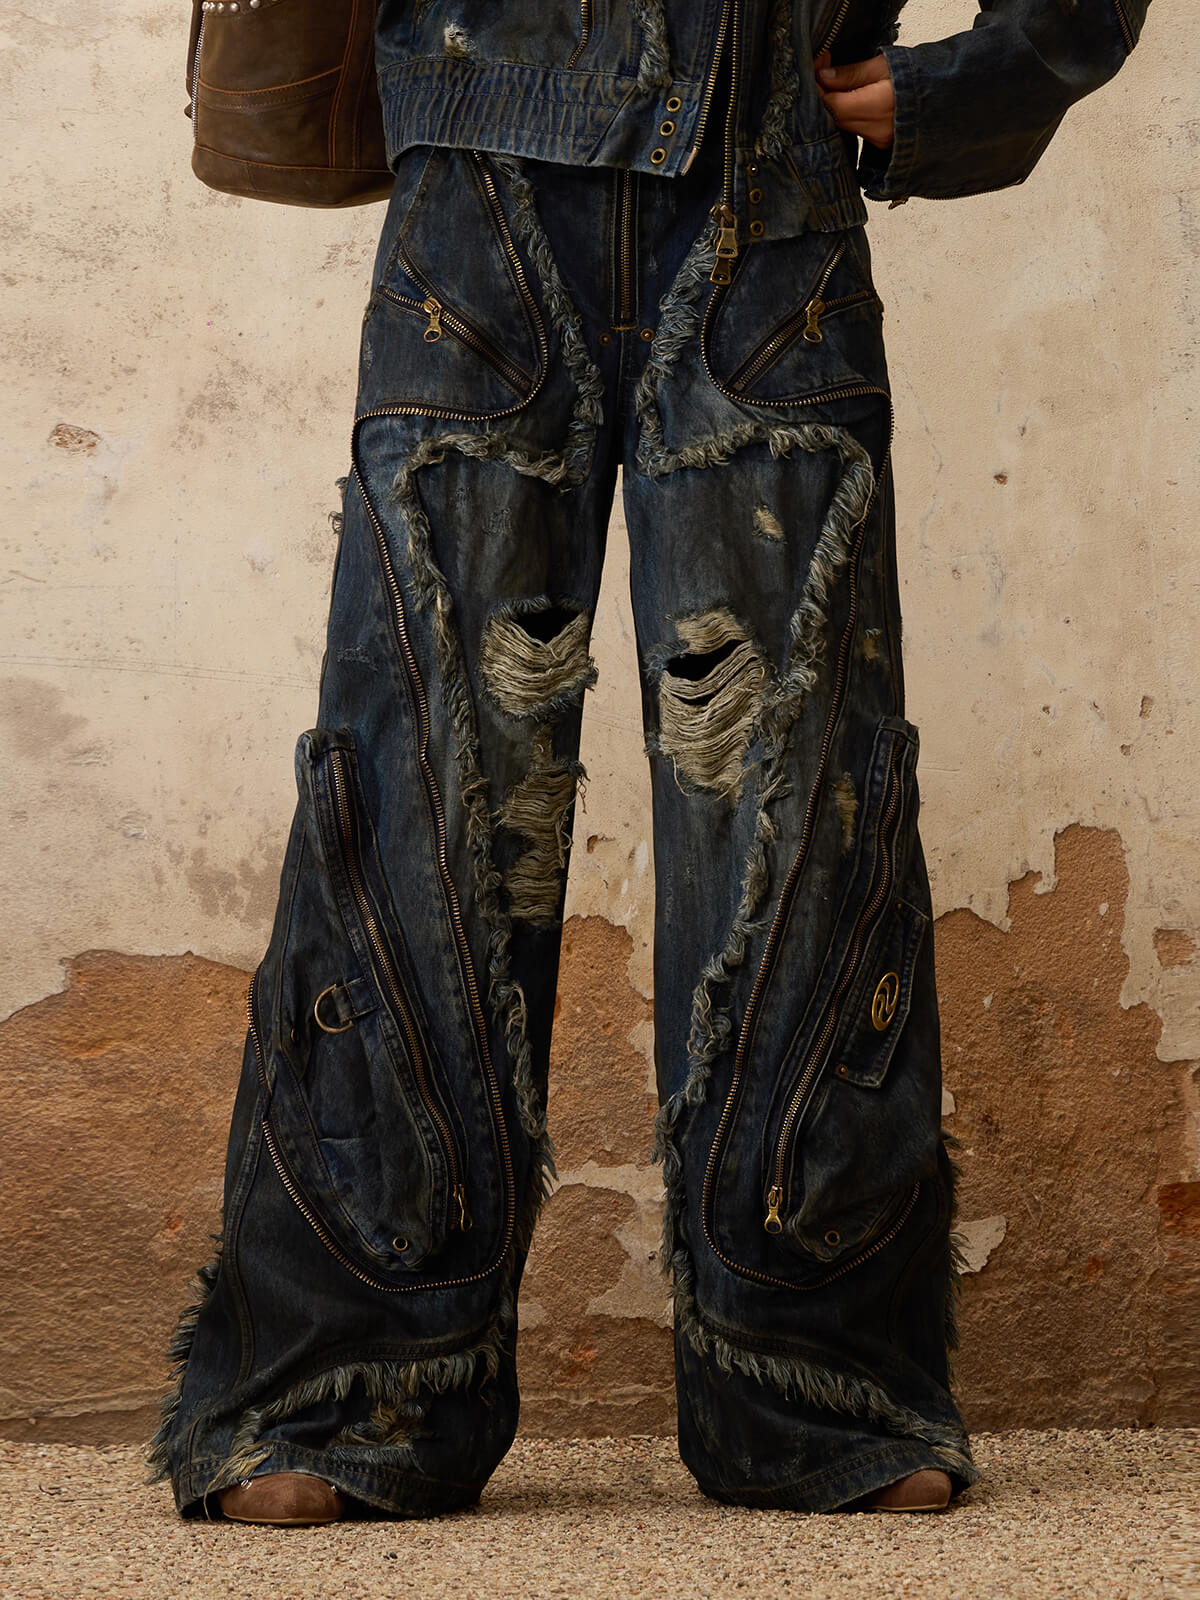 Personsoul Aliens Dirty Ripped Denim Jeans